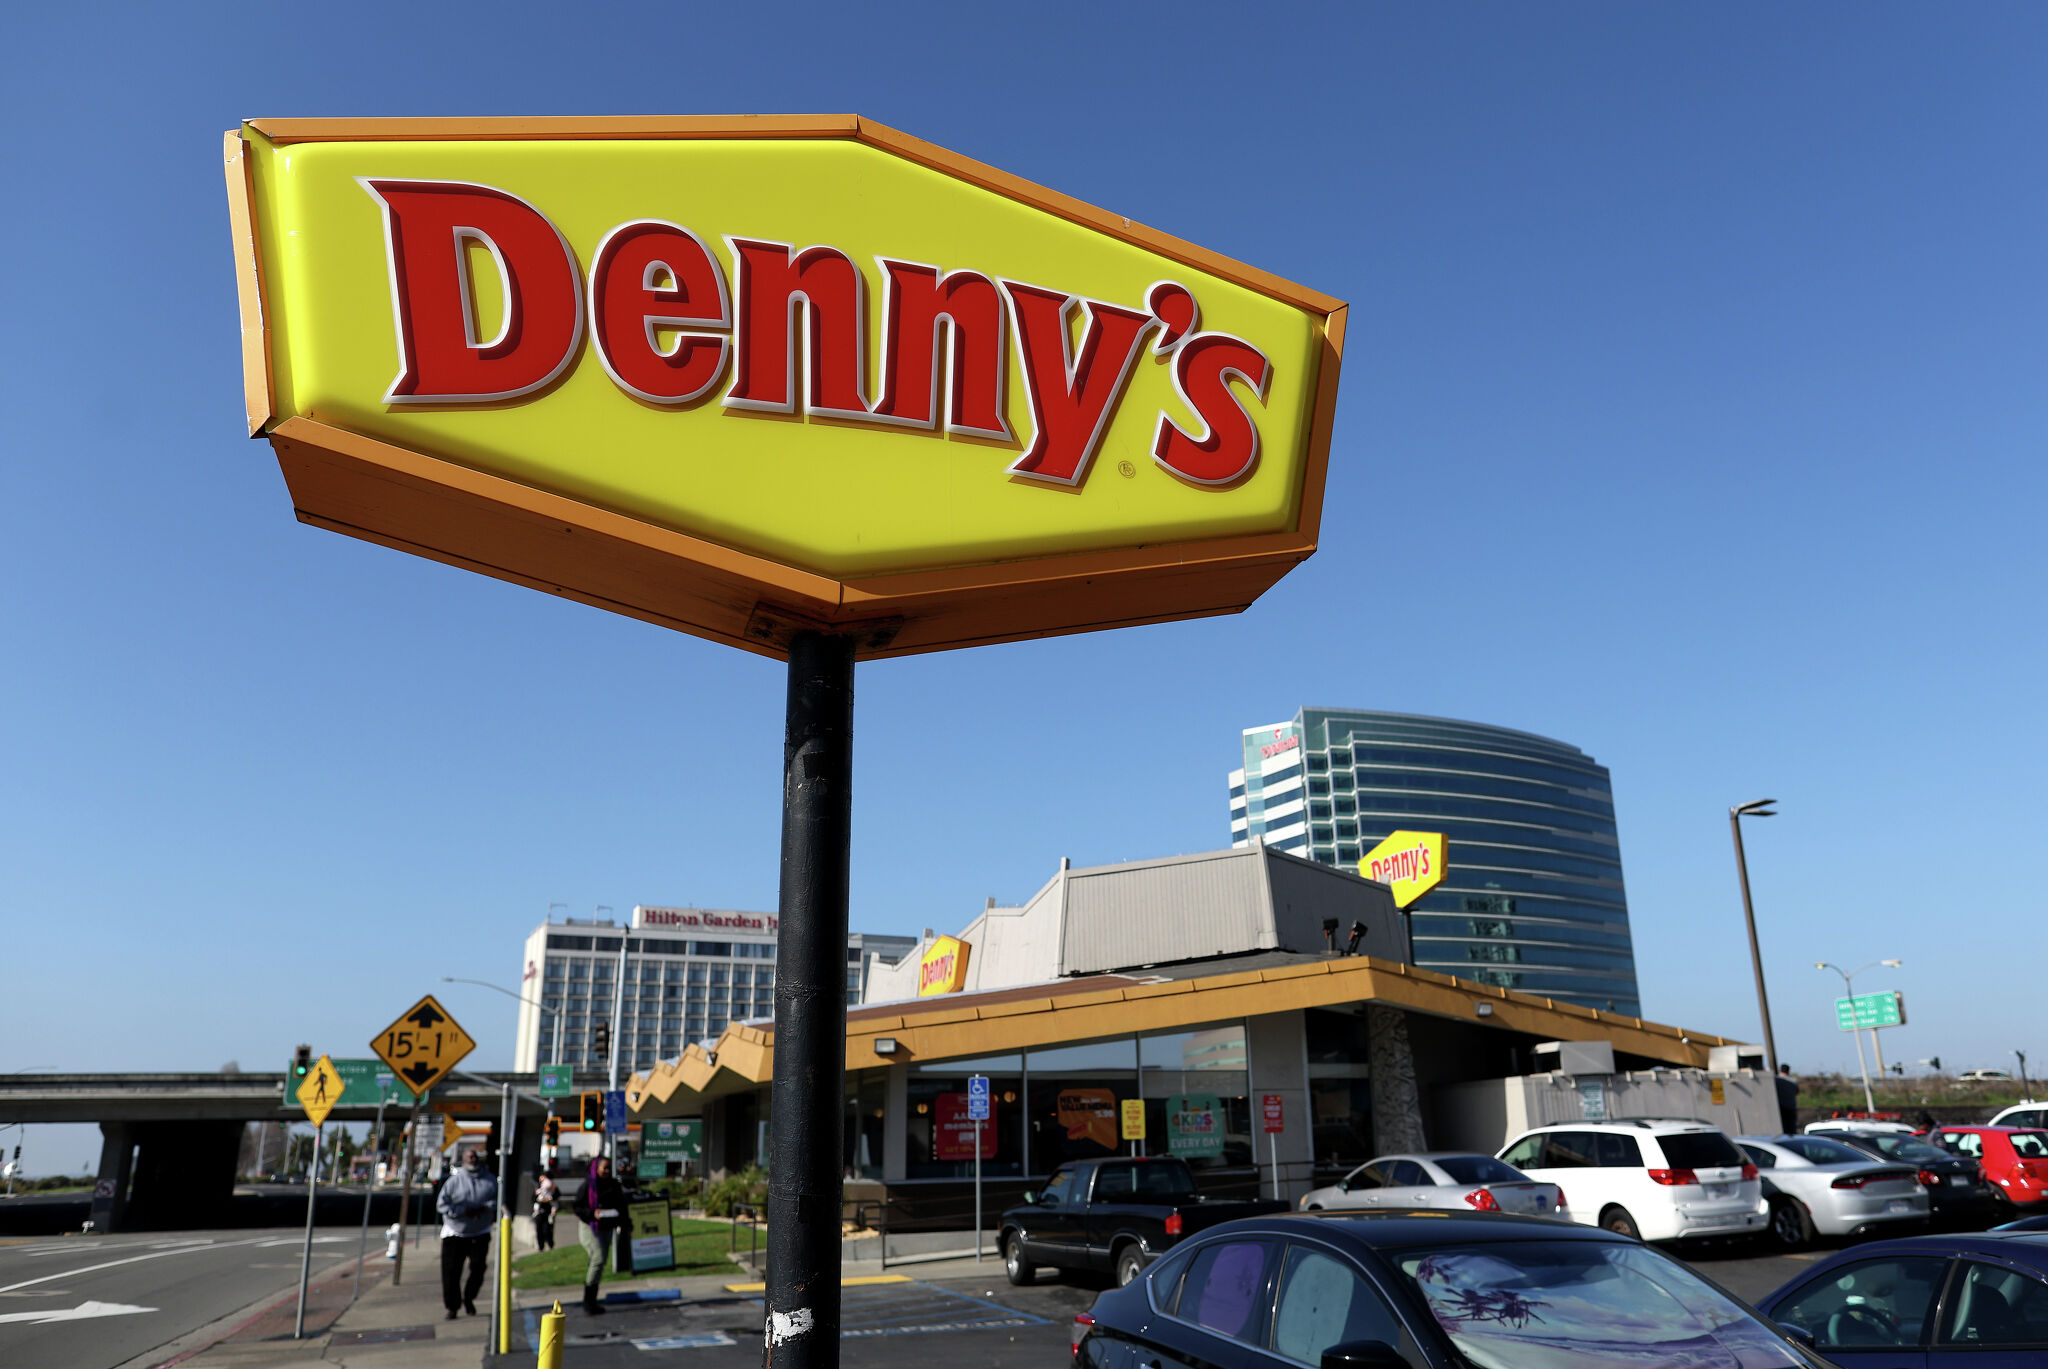 California's first drive-thru Denny's just opened - ABC7 Los Angeles